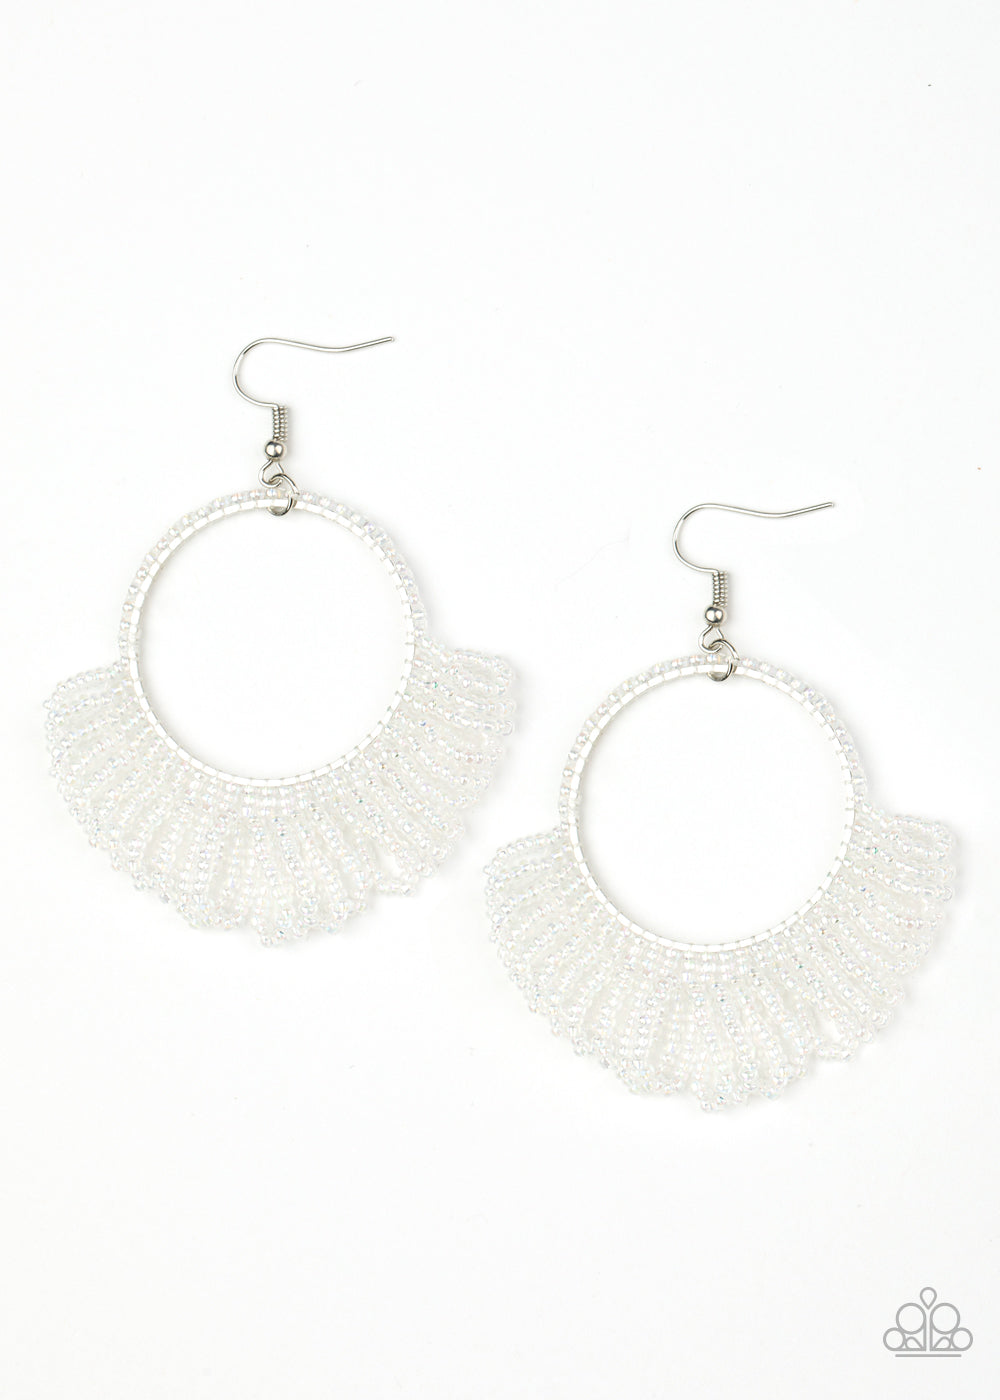 &lt;P&gt;Rings of dainty iridescent seed beads cascade from the bottom of a matching beaded hoop, creating a dramatically colorful fringe. Earring attaches to a standard fishhook fitting.&lt;/P&gt;  

&lt;P&gt; &lt;I&gt;  Sold as one pair of earrings. &lt;/I&gt;  &lt;/P&gt;


&lt;img src=\&quot;https://d9b54x484lq62.cloudfront.net/paparazzi/shopping/images/517_tag150x115_1.png\&quot; alt=\&quot;New Kit\&quot; align=\&quot;middle\&quot; height=\&quot;50\&quot; width=\&quot;50\&quot;/&gt;